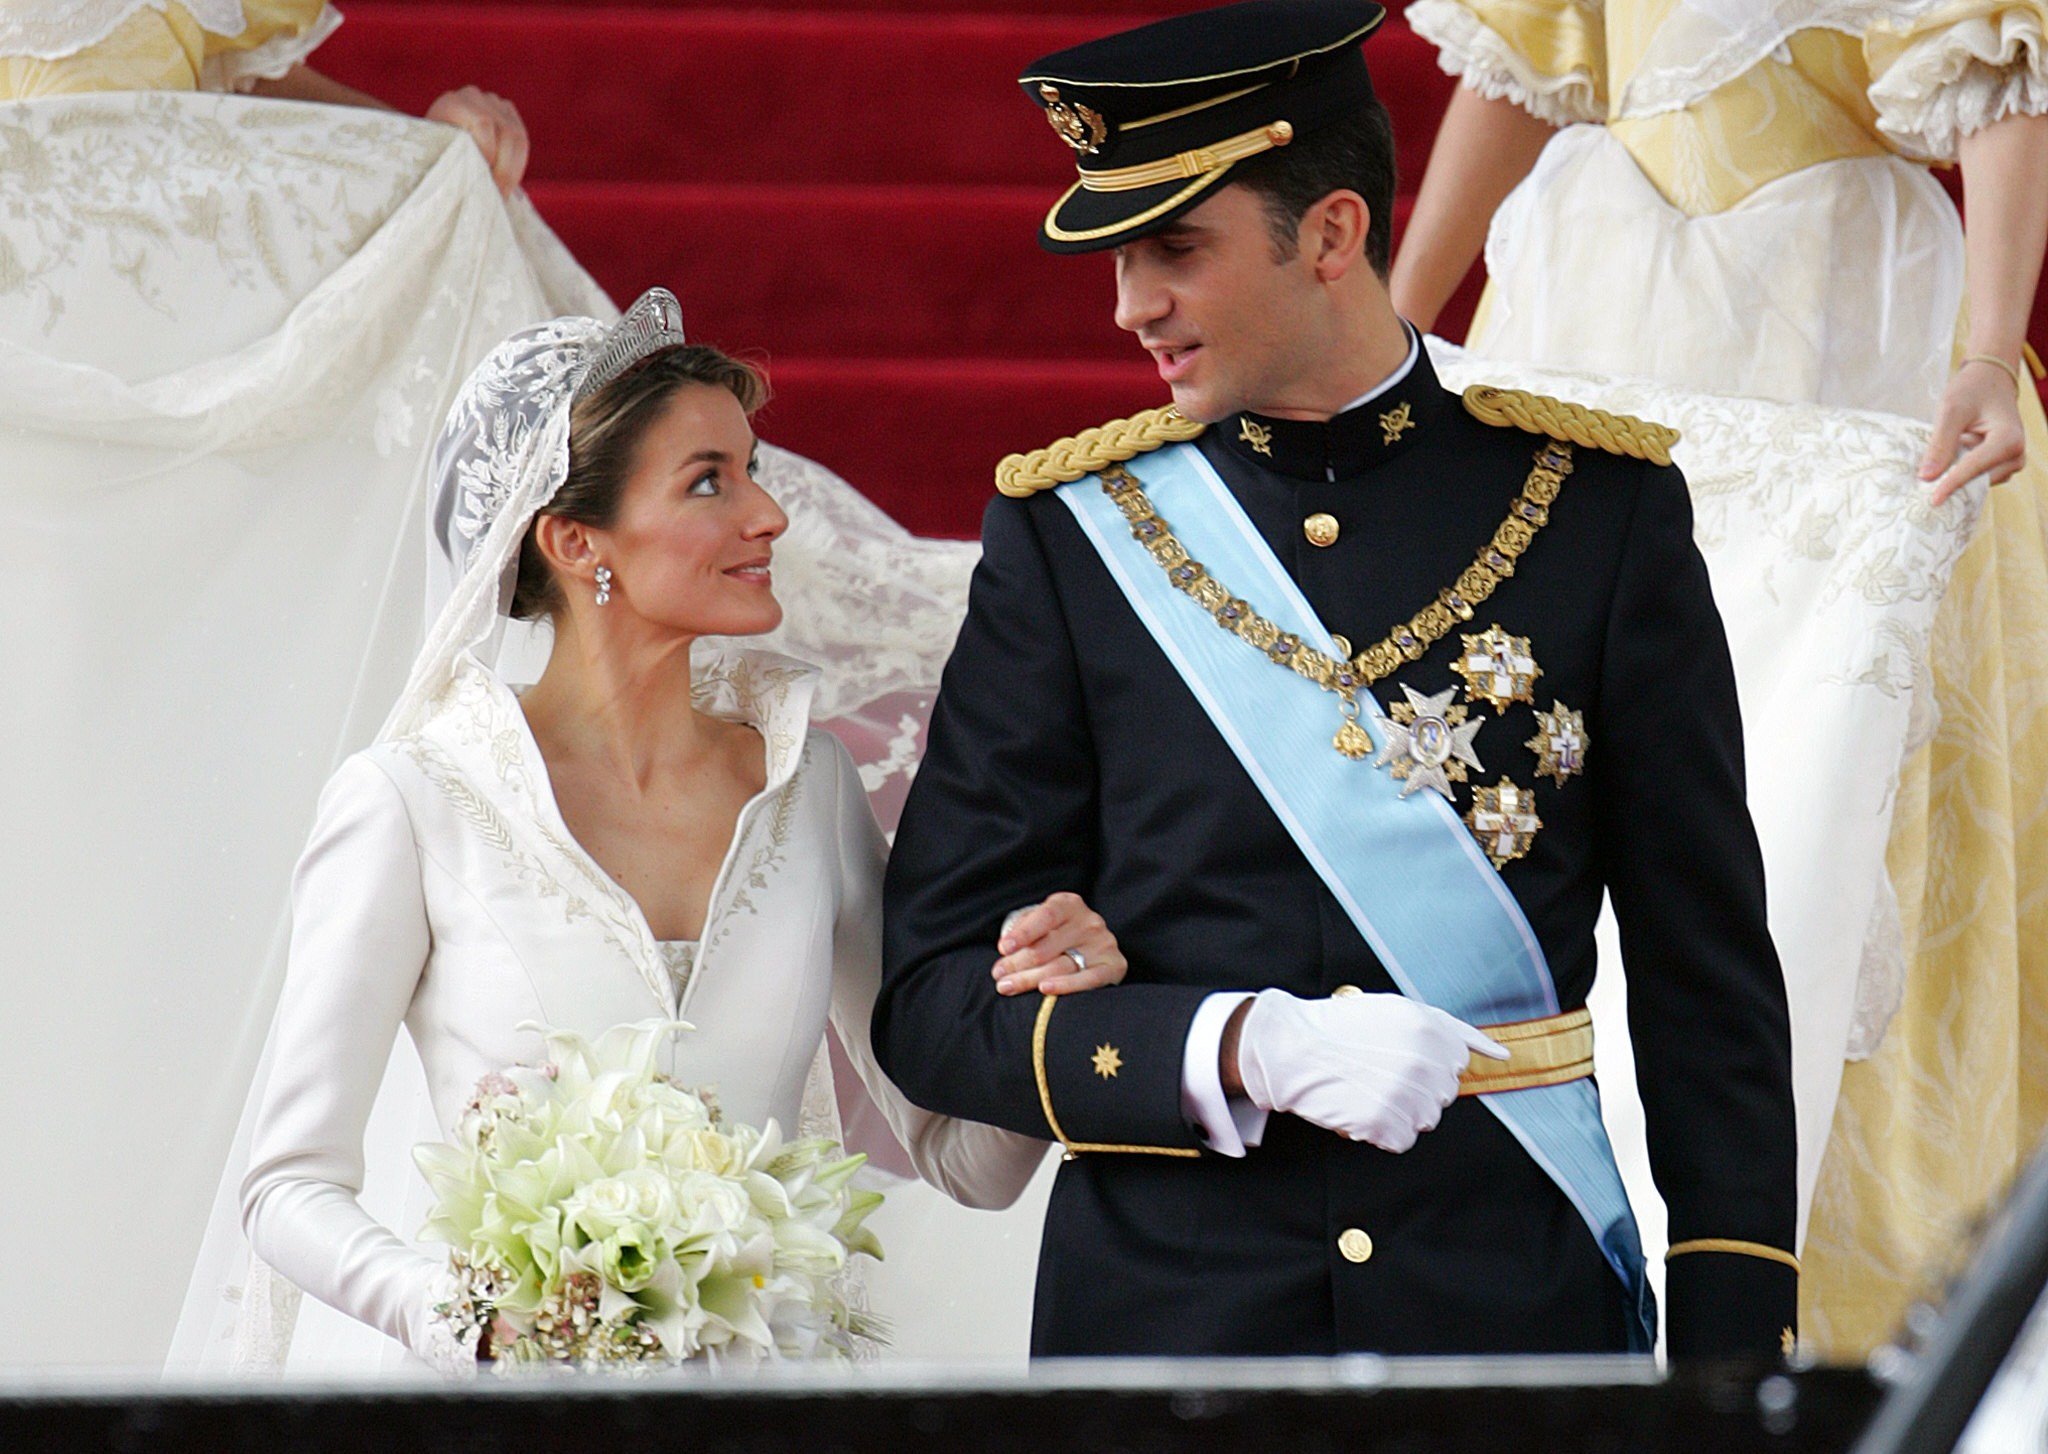 Princess of Asturias Letizia Ortiz and her husband Spanish Crown Prince Felipe of Bourbon pictured leaving Madrid's Almudena Cathedral at the end of their wedding ceremony on May 22, 2004. / Source: Getty Images